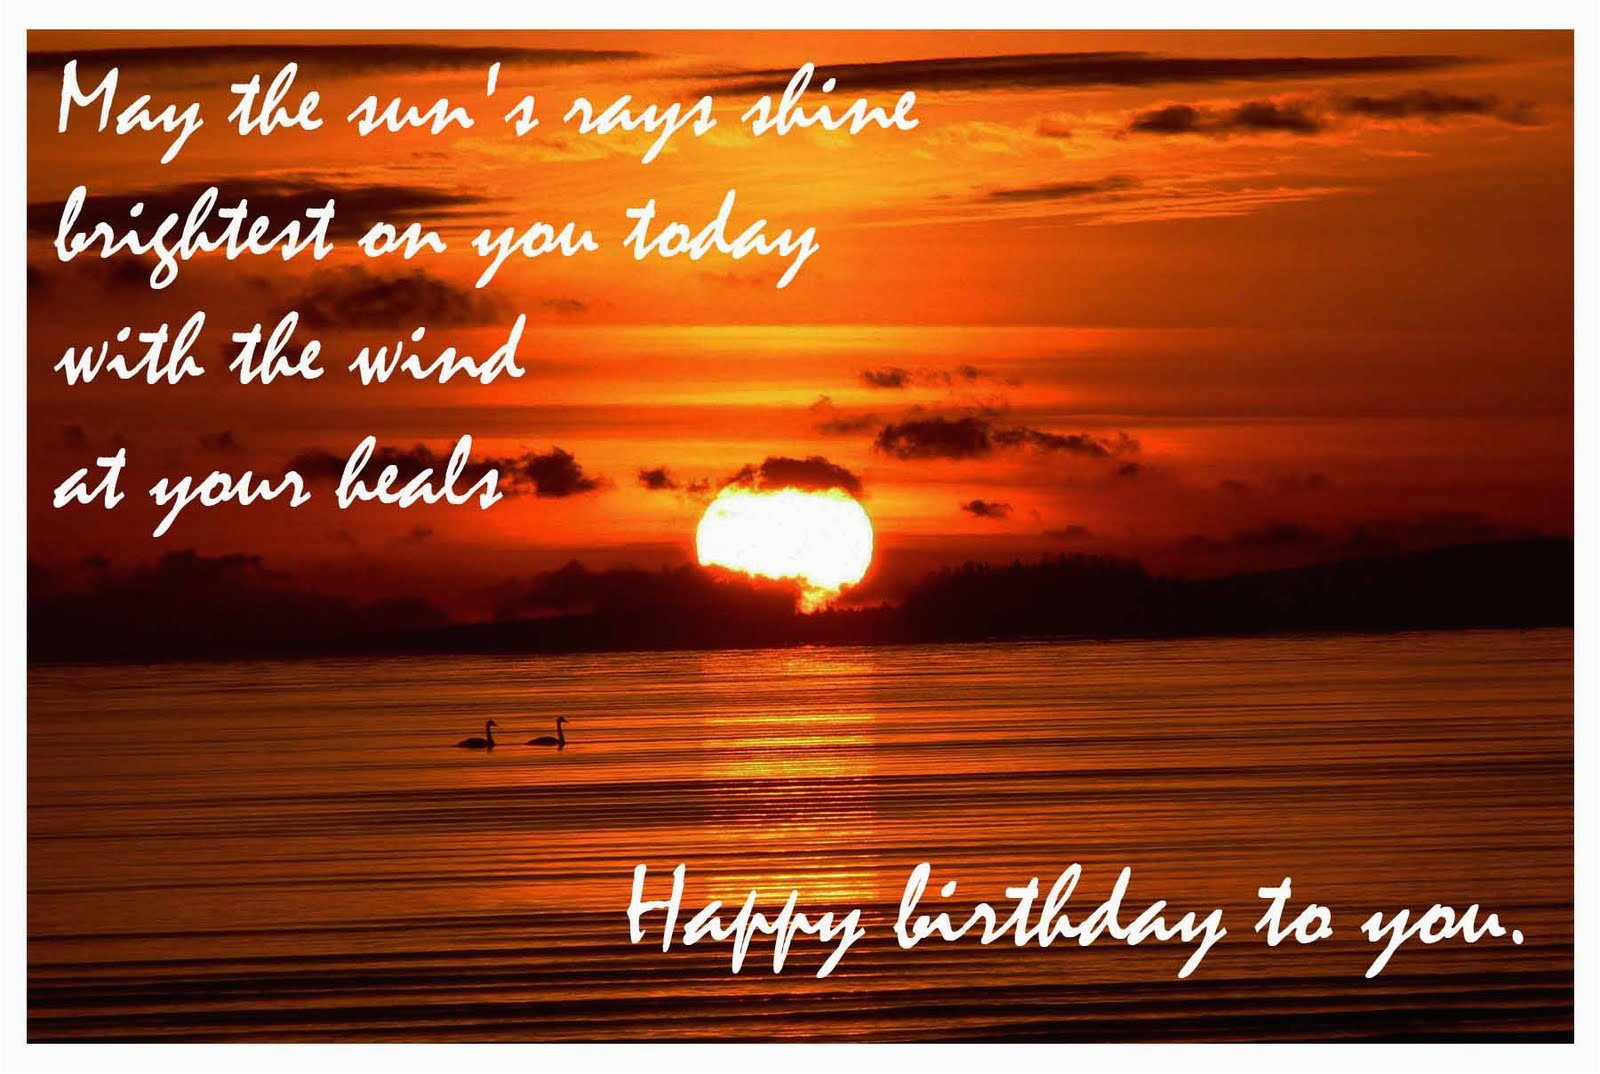 happy birthday quotes for a male friend